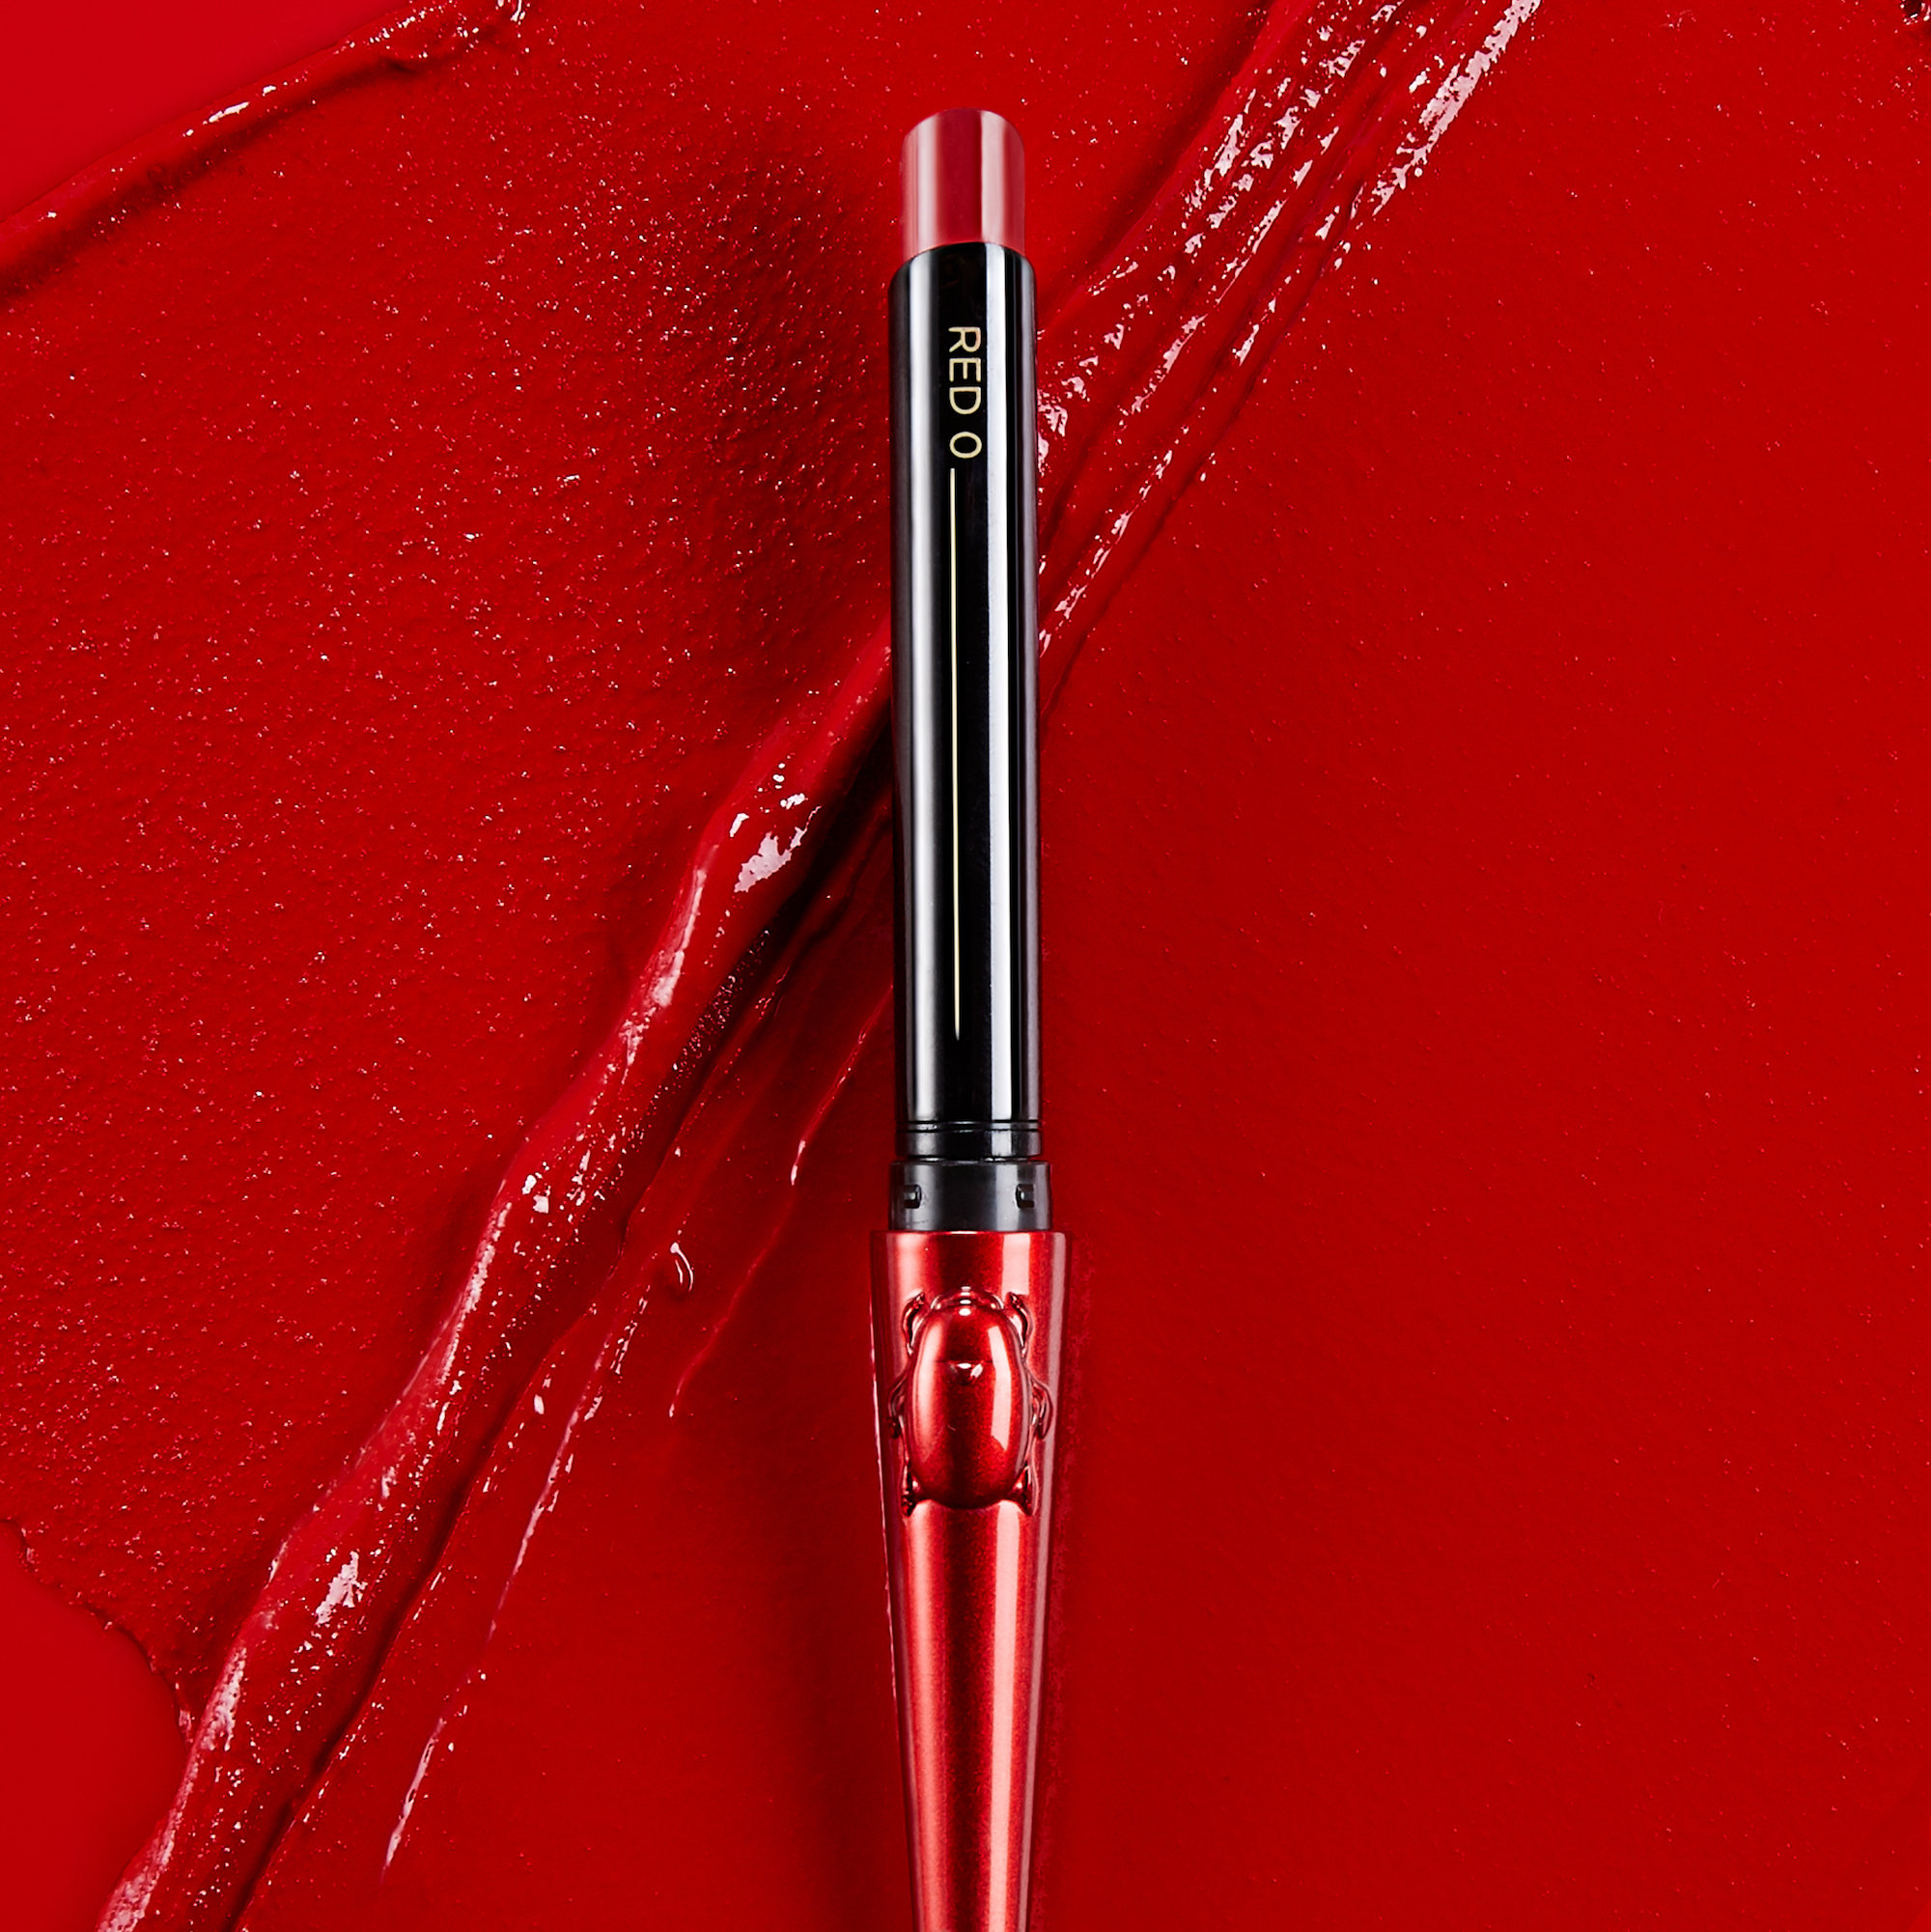 Alternate product image for Confession Ultra Slim High Intensity Refillable Lipstick - Red 0 shown with the description.